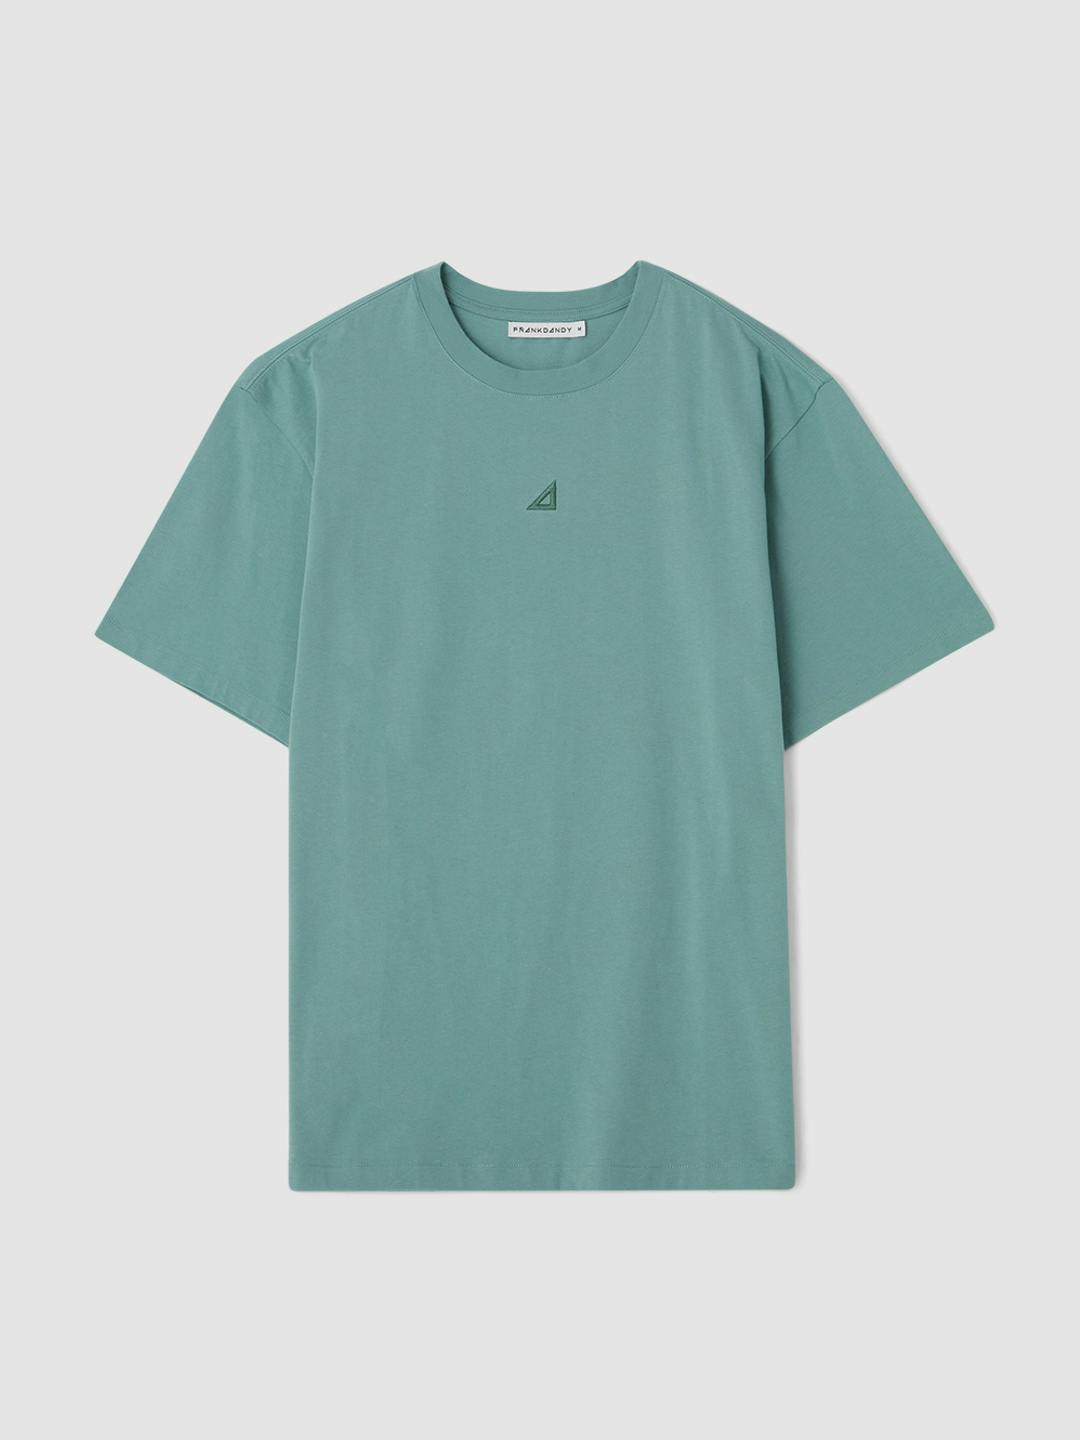 Men's Tee Loose Fit Dusty Turquoise